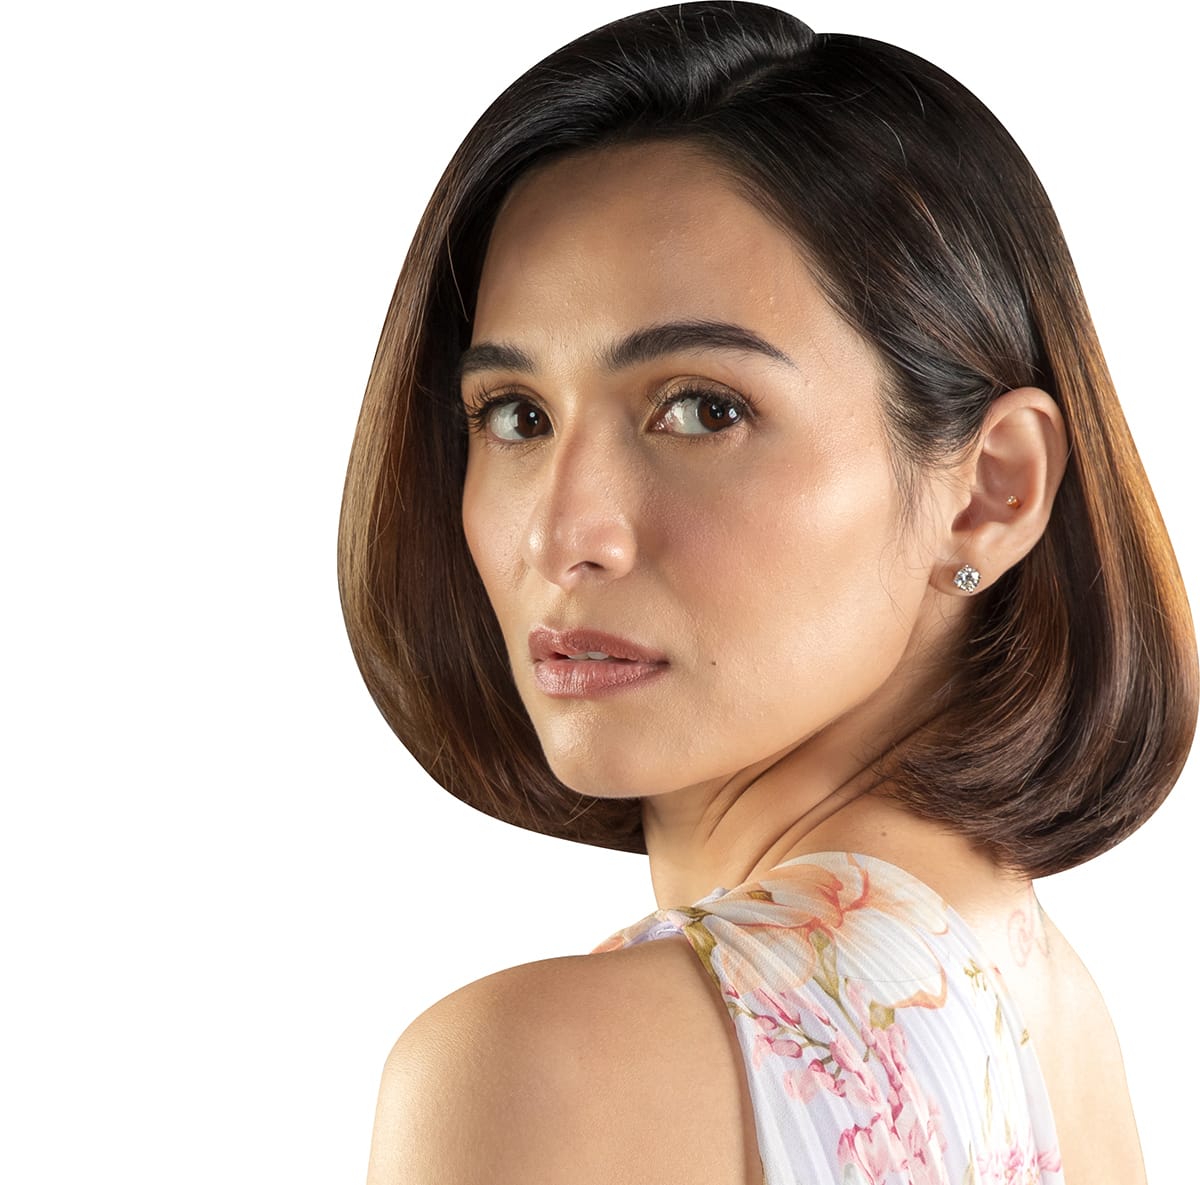 Jennylyn Mercado Embraces the ‘Ultimate Survivor’ Role in Life, Career and Family